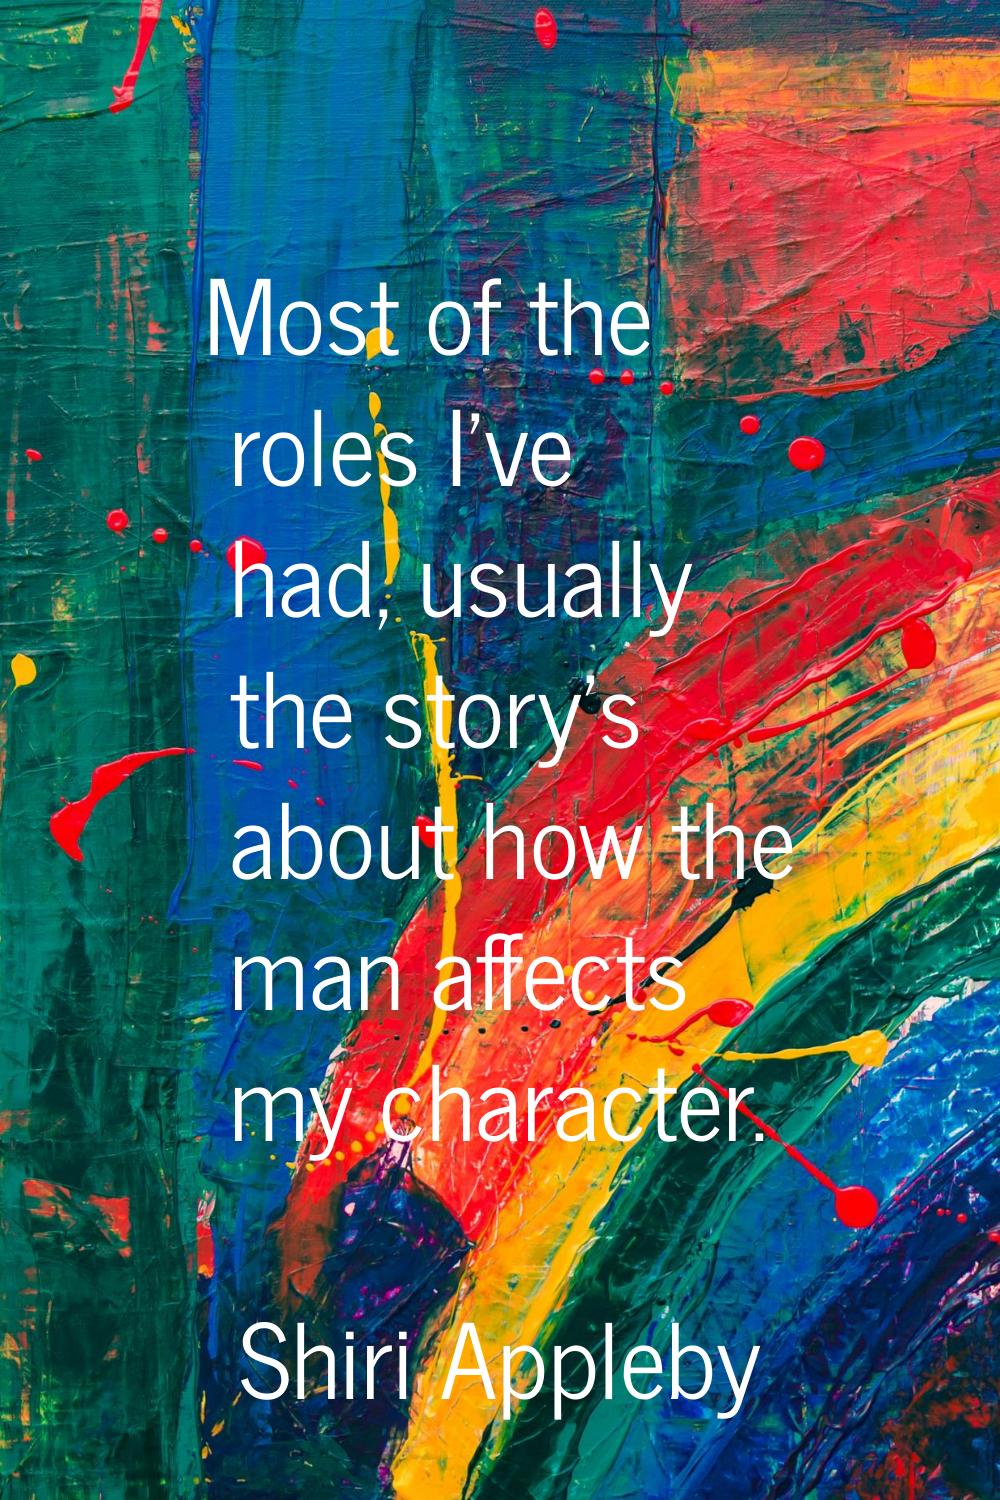 Most of the roles I've had, usually the story's about how the man affects my character.